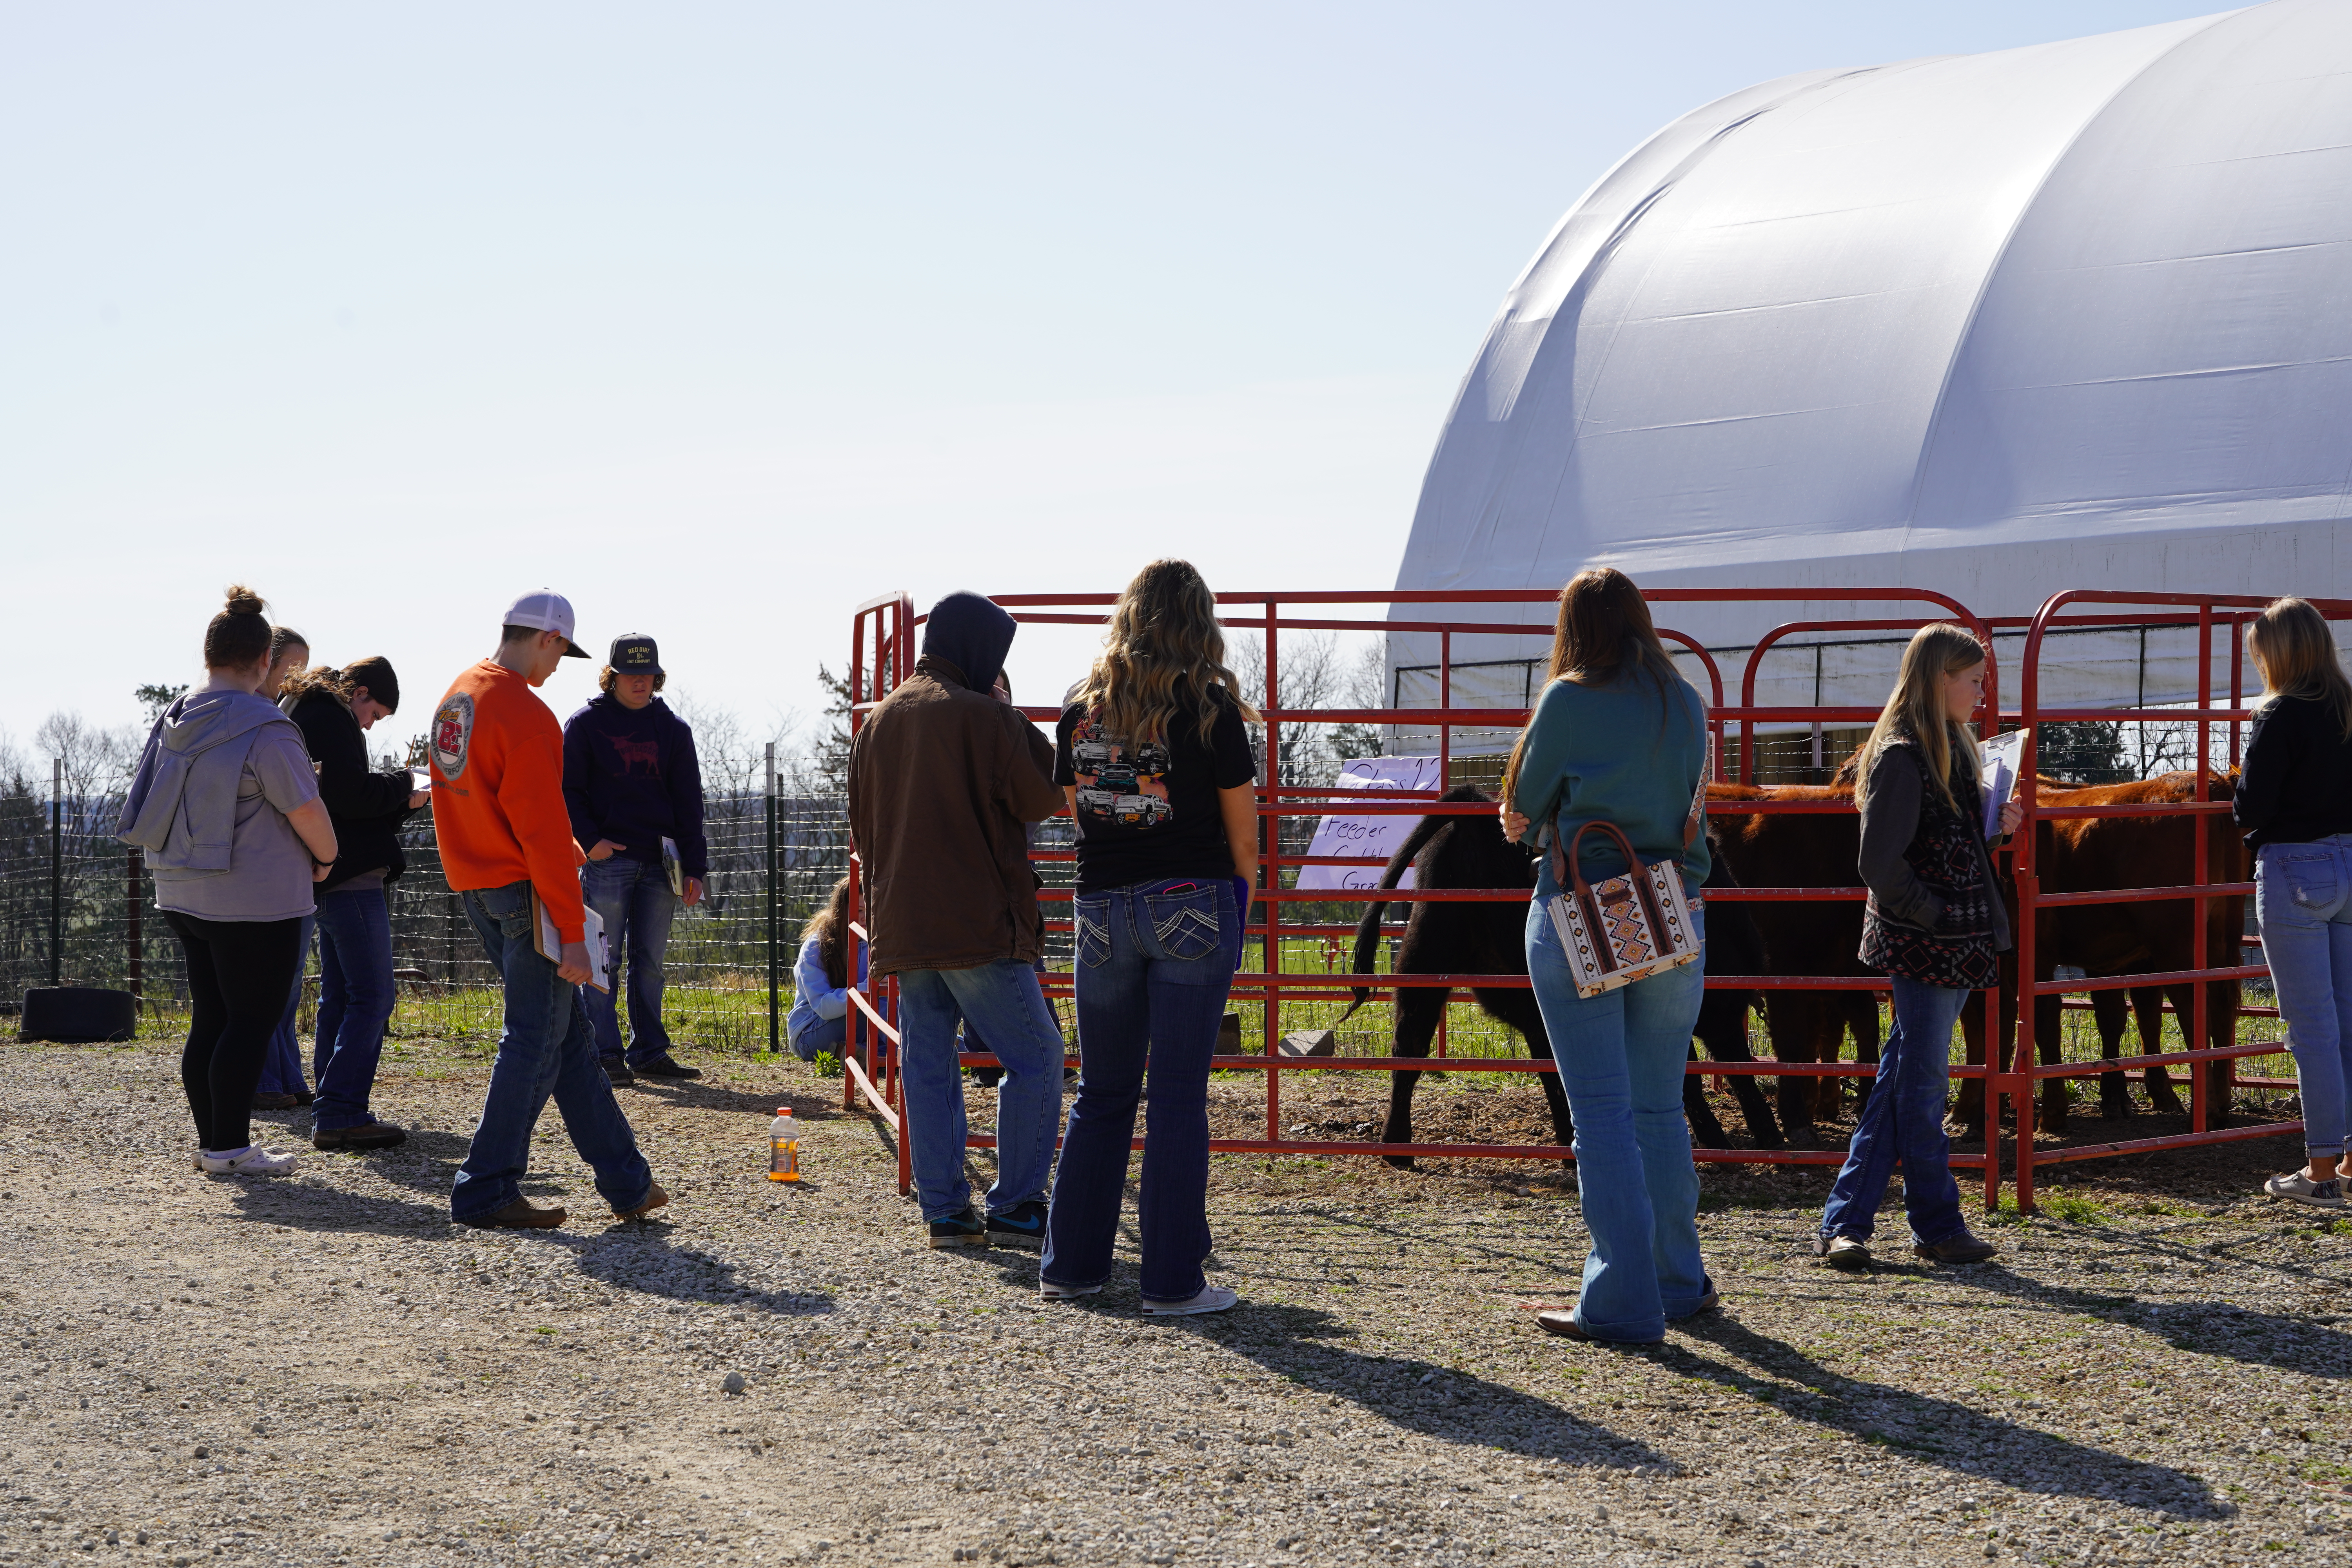 Students assess sheep, goats, pigs and cows at various stations during livestock evaluations.